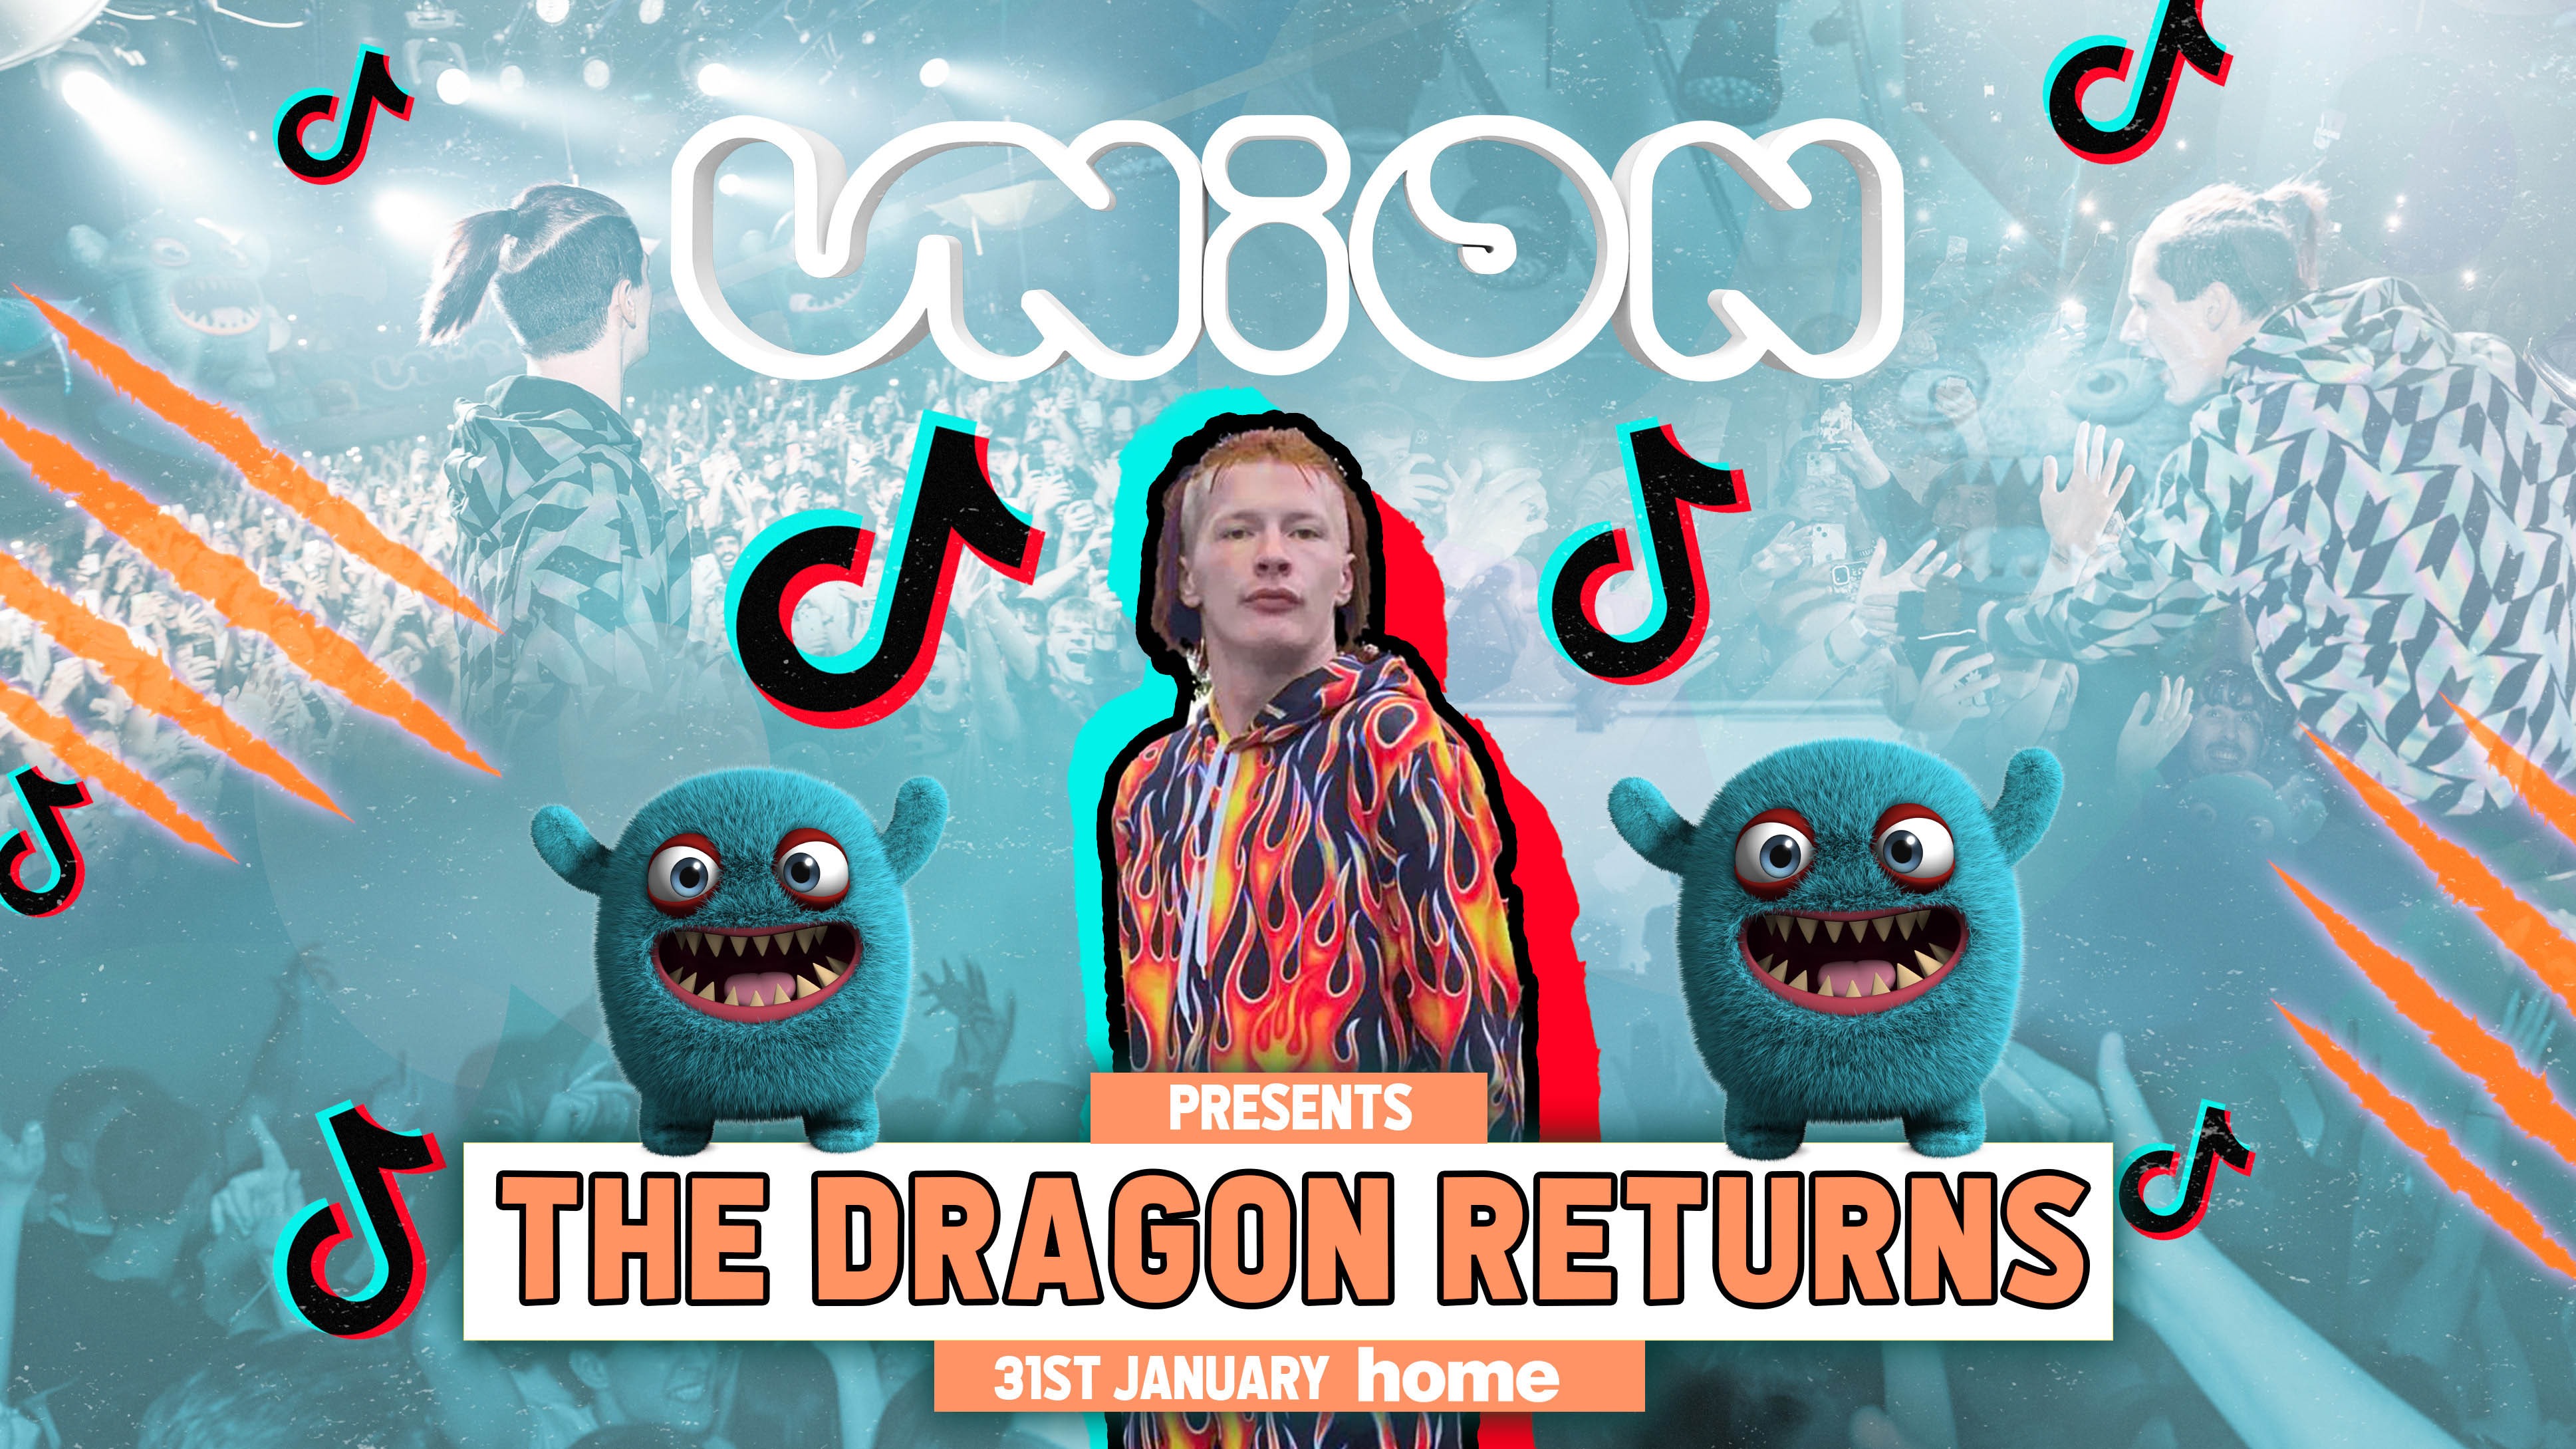 UNION TUESDAY’S PRESENTS RETURN OF THE DRAGON!